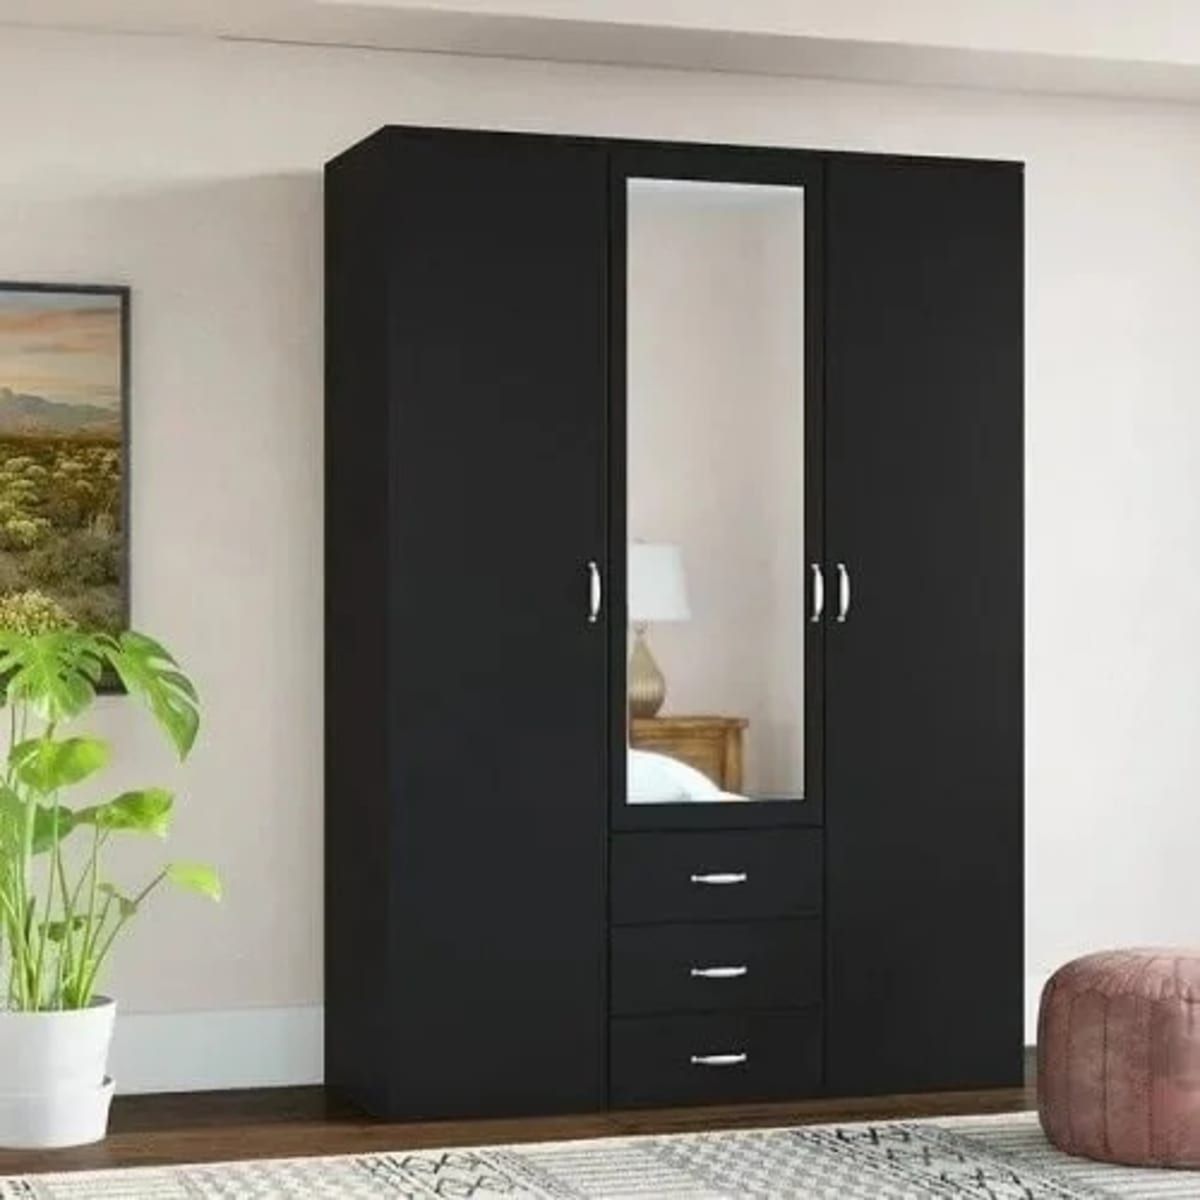 Vic Beads 3 Door Wardrobe With 3 Drawer And Mirror – Black | Konga Online  Shopping Pertaining To Wardrobes 3 Door With Mirror (View 4 of 15)